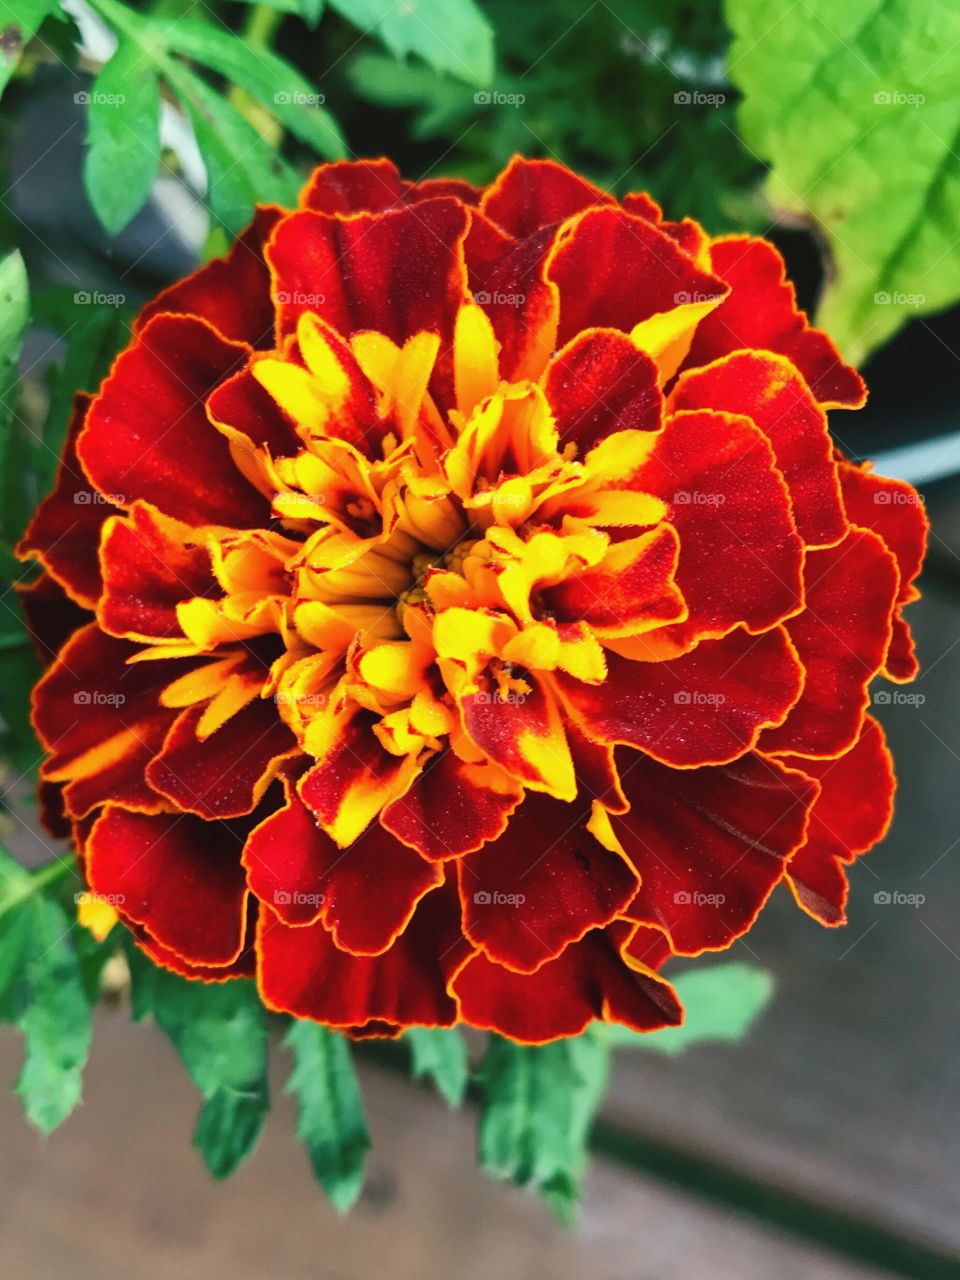 Marigolds of yellow and red